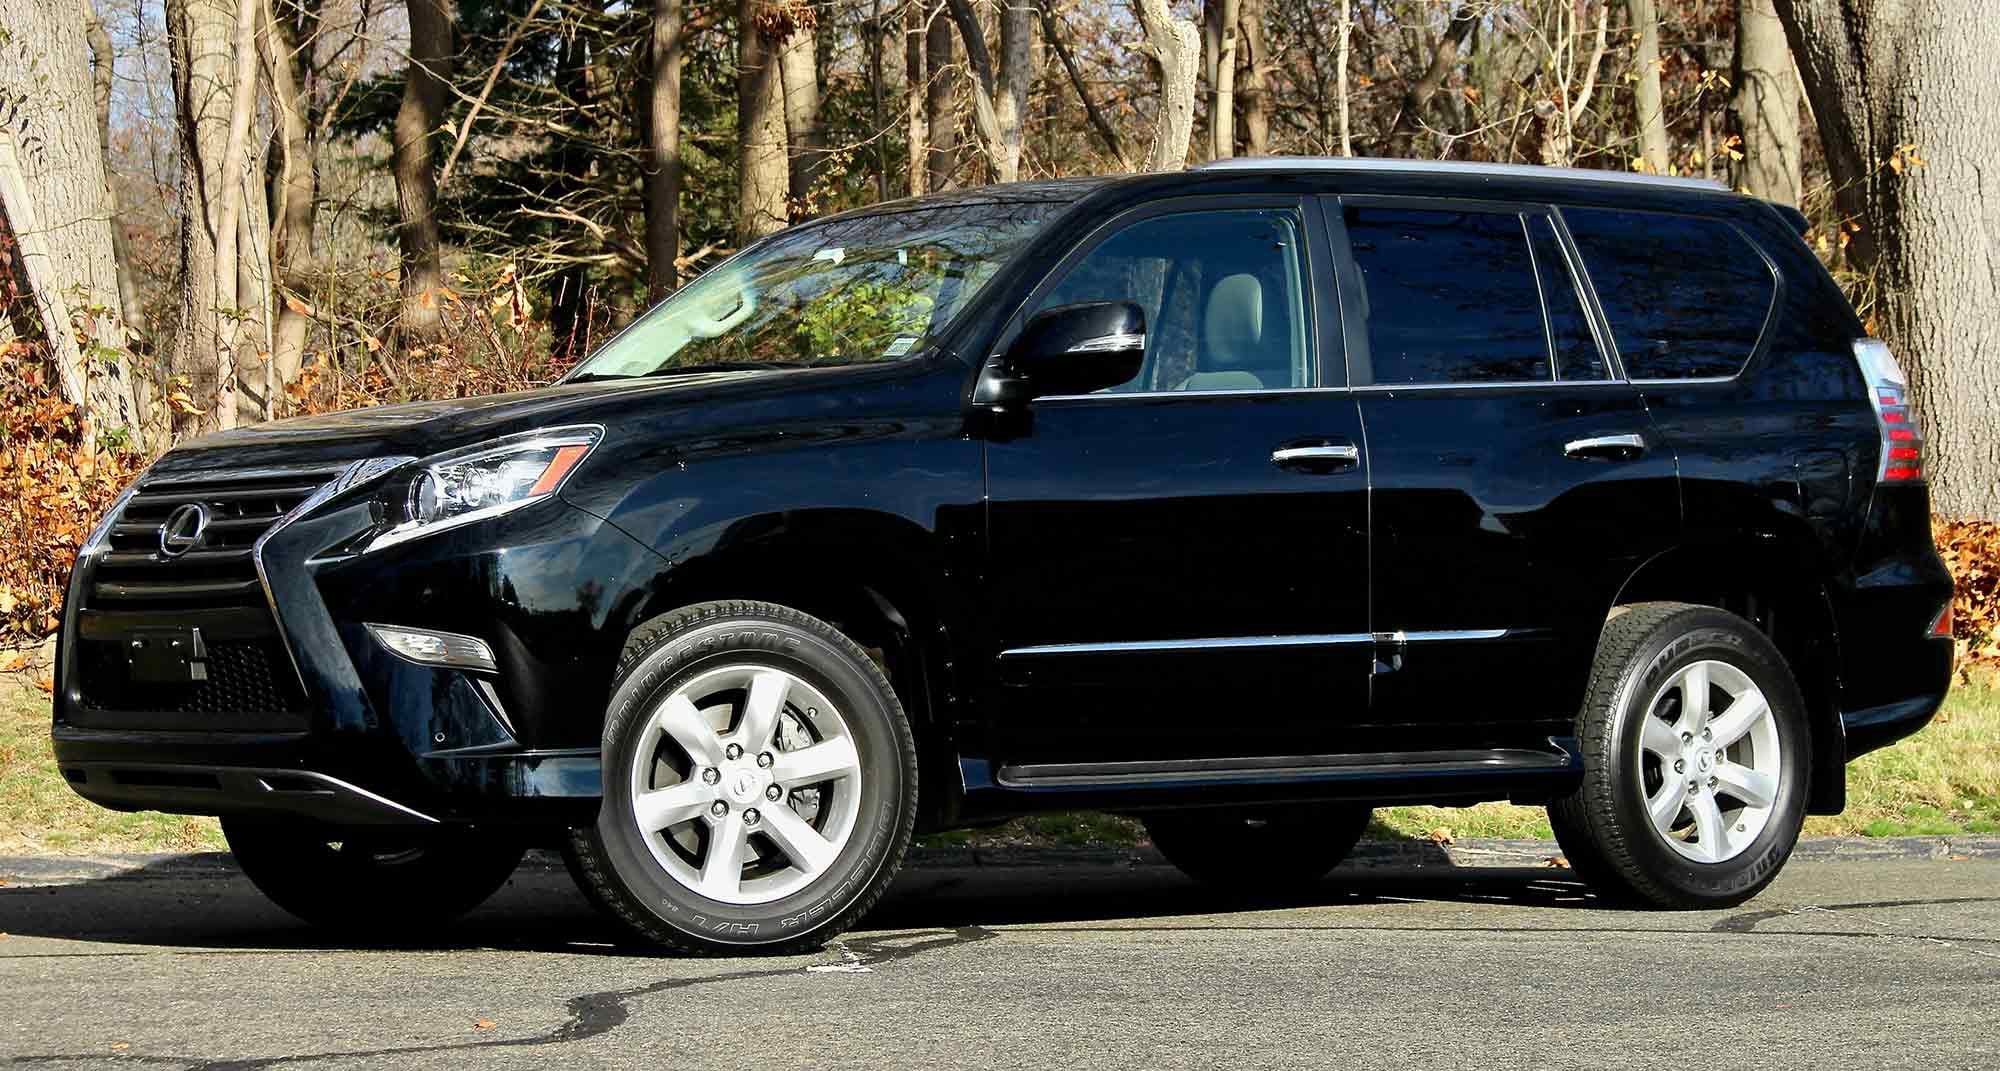 Our new-to-us Lexus GX460.